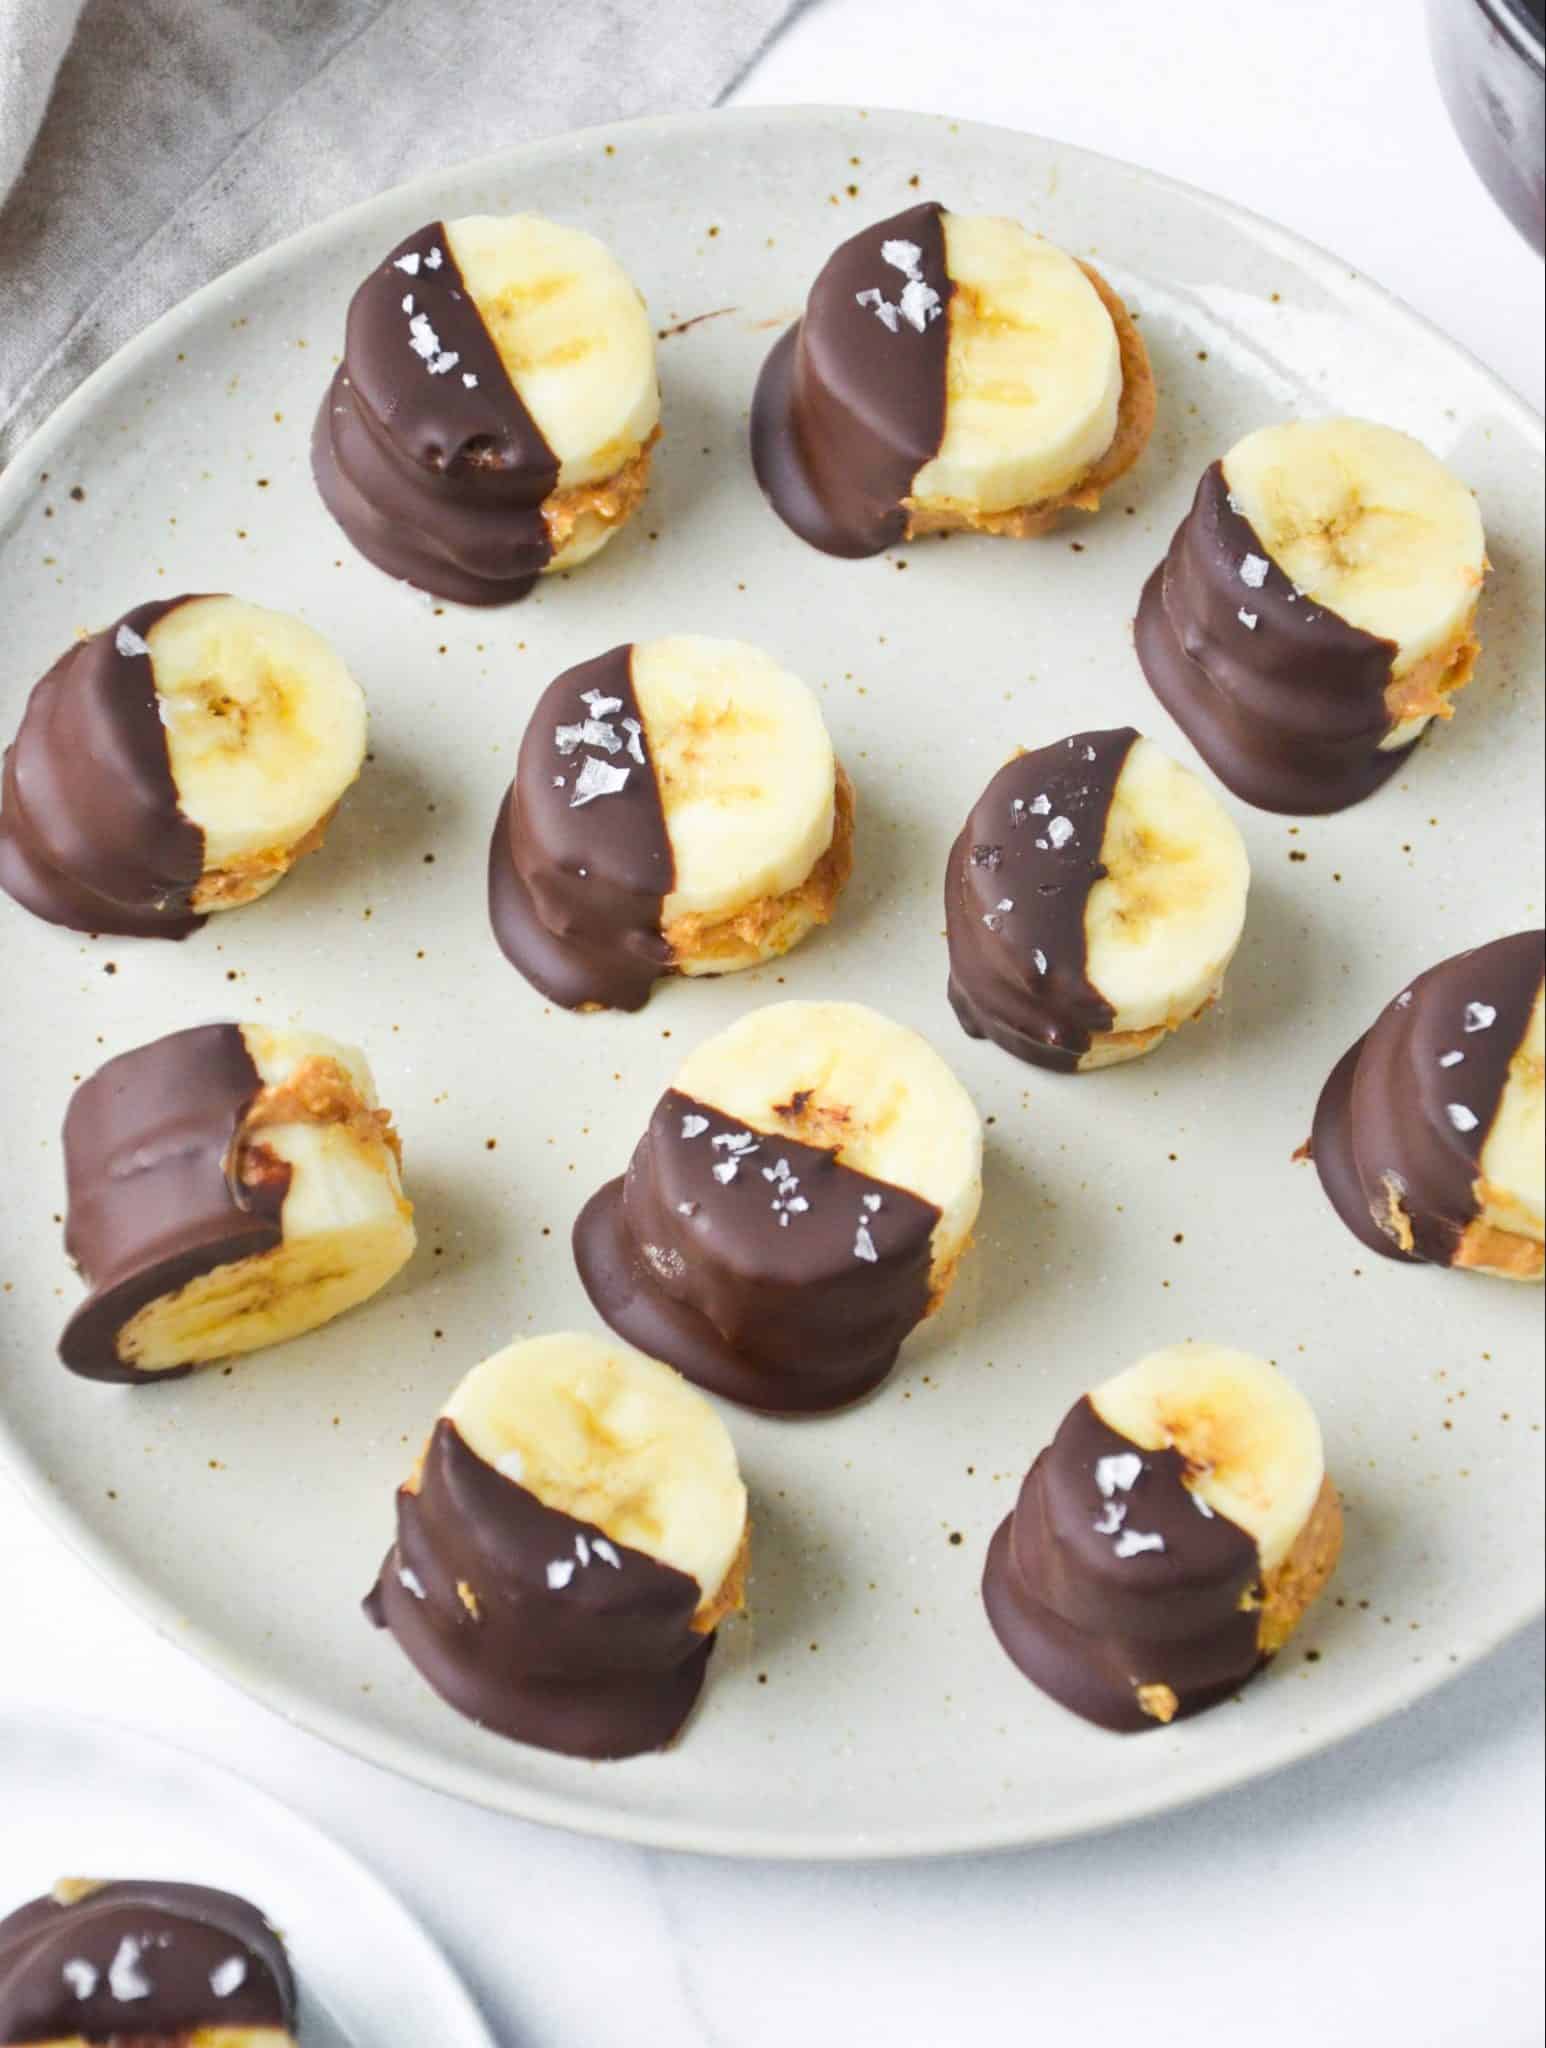 banana bites with peanut butter and chocolate on a round plate.